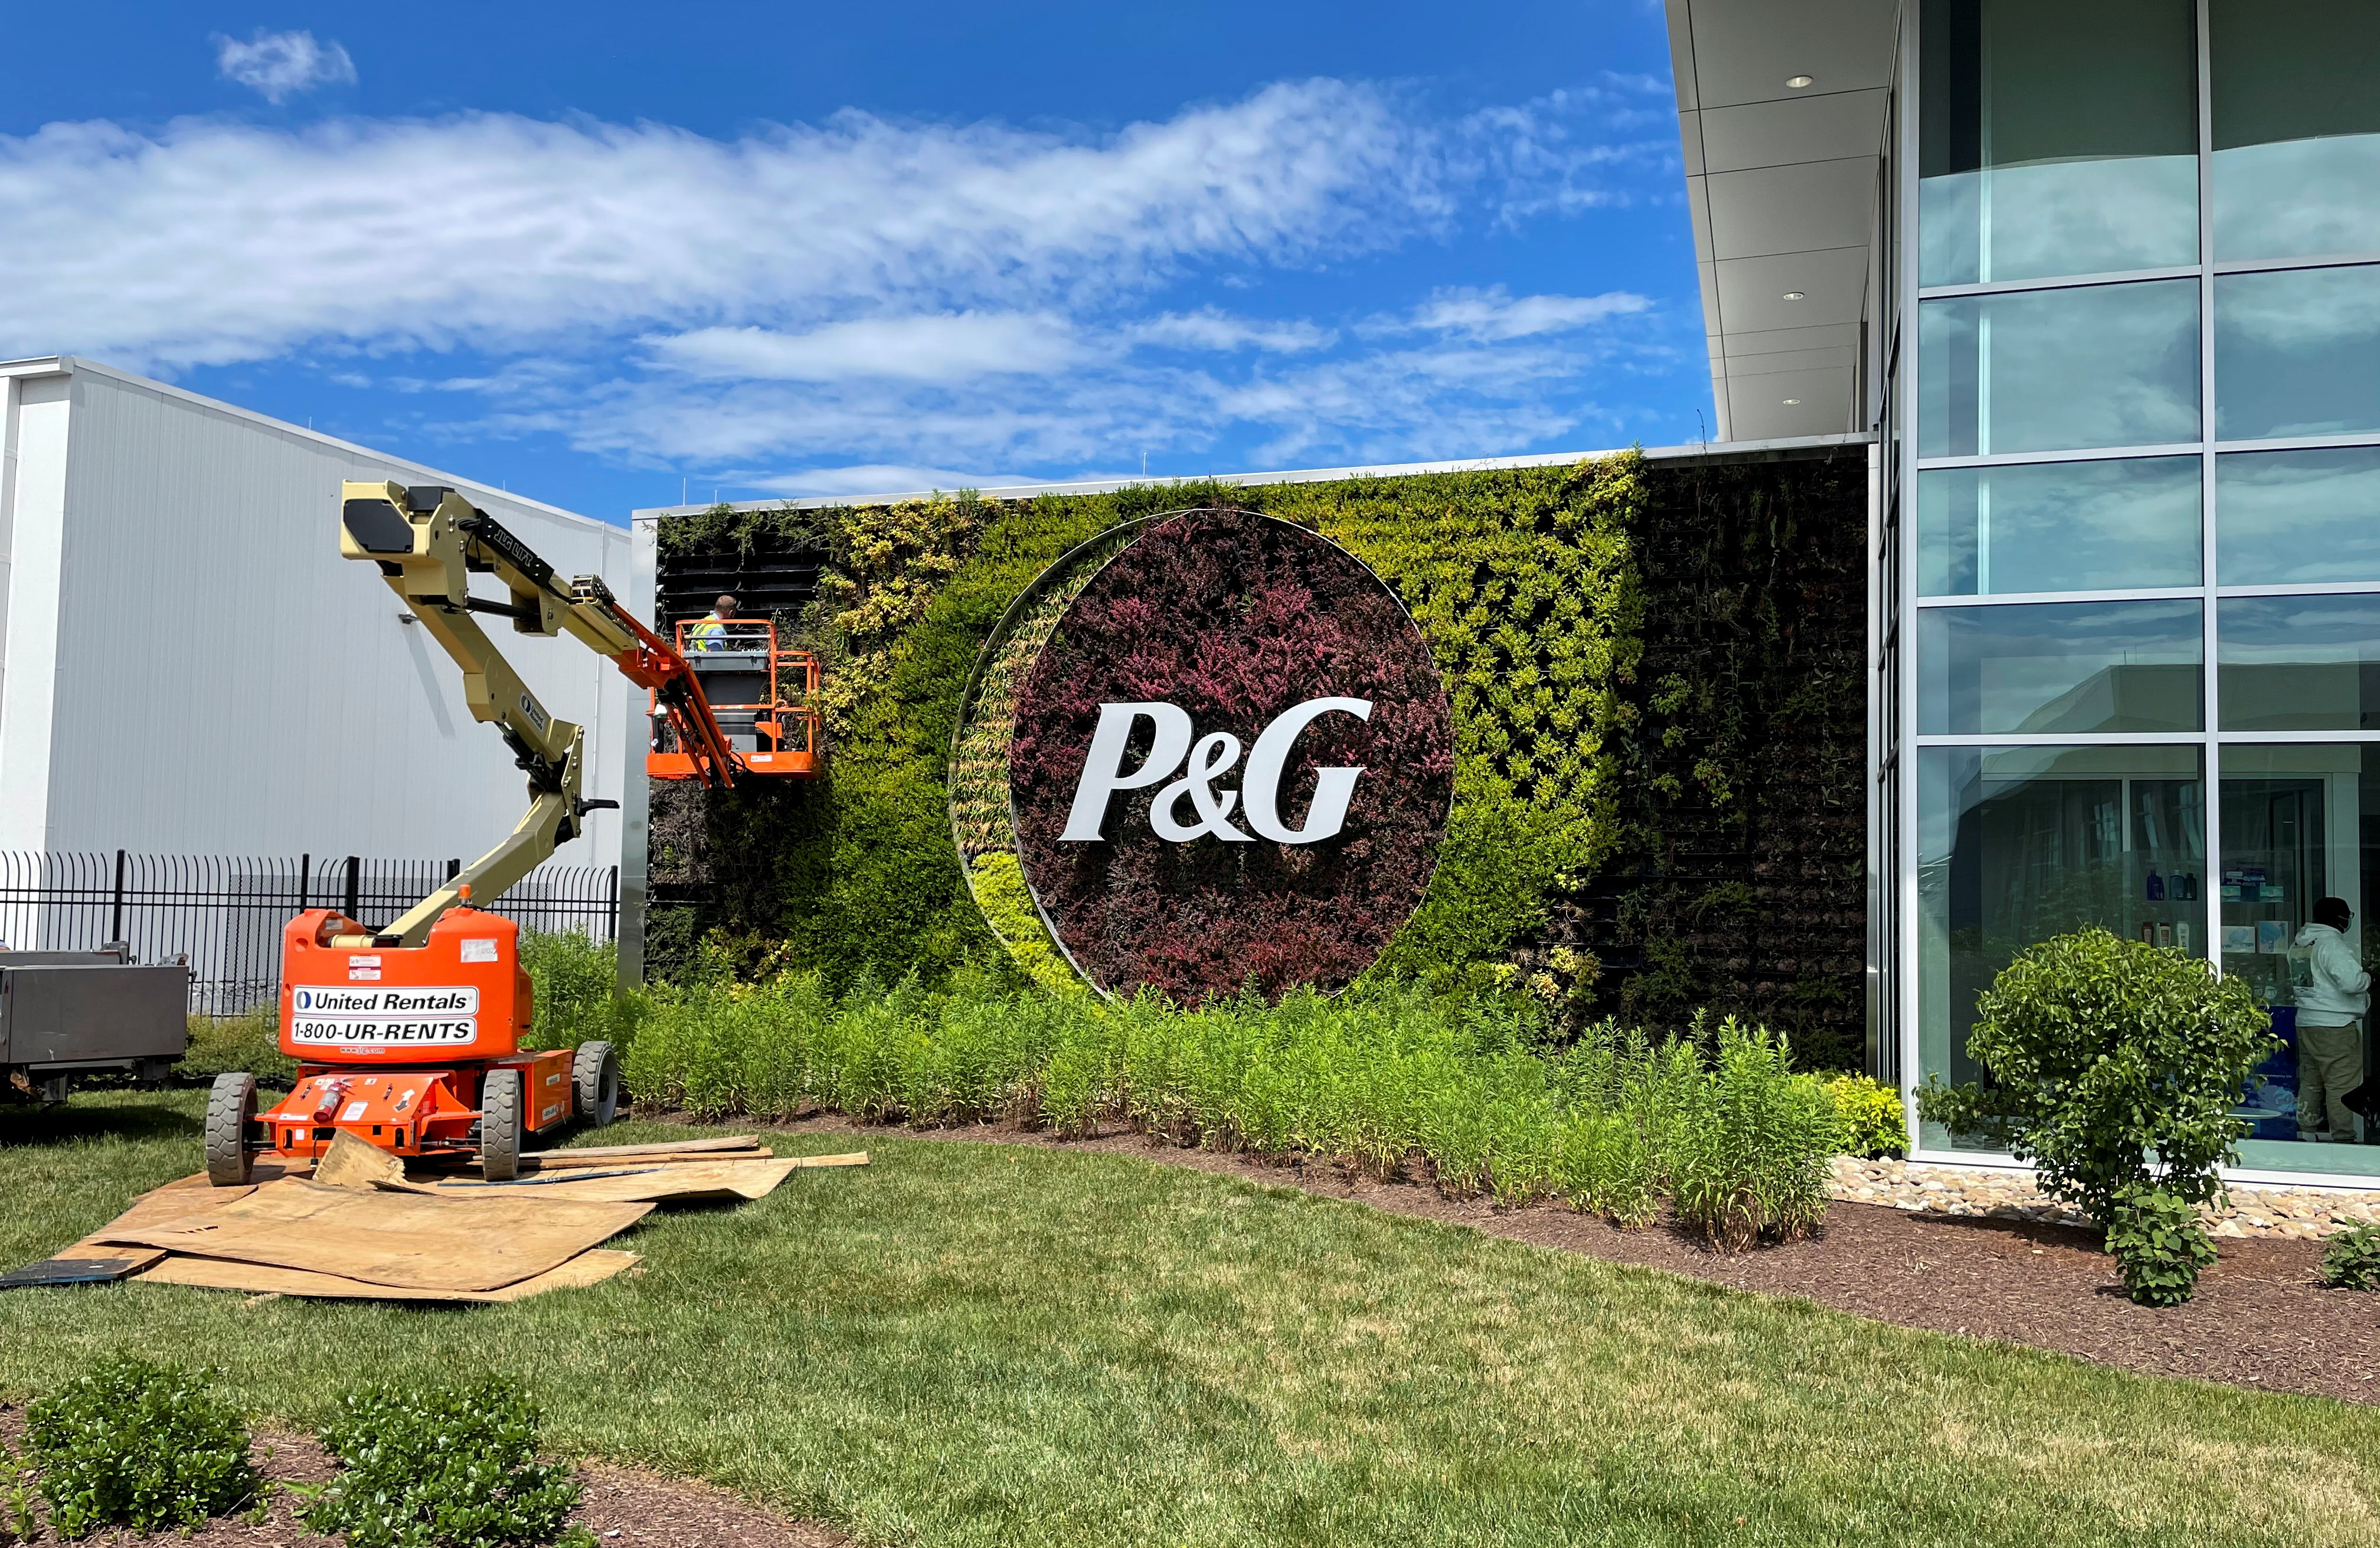 A plant wall with Procter & Gamble's logo is pictured at the entrance to the company's highly automated cleaning products factory in Tabler Station, West Virginia, U.S., May 28, 2021. Picture taken May 28, 2021. REUTERS/Timothy Aeppel